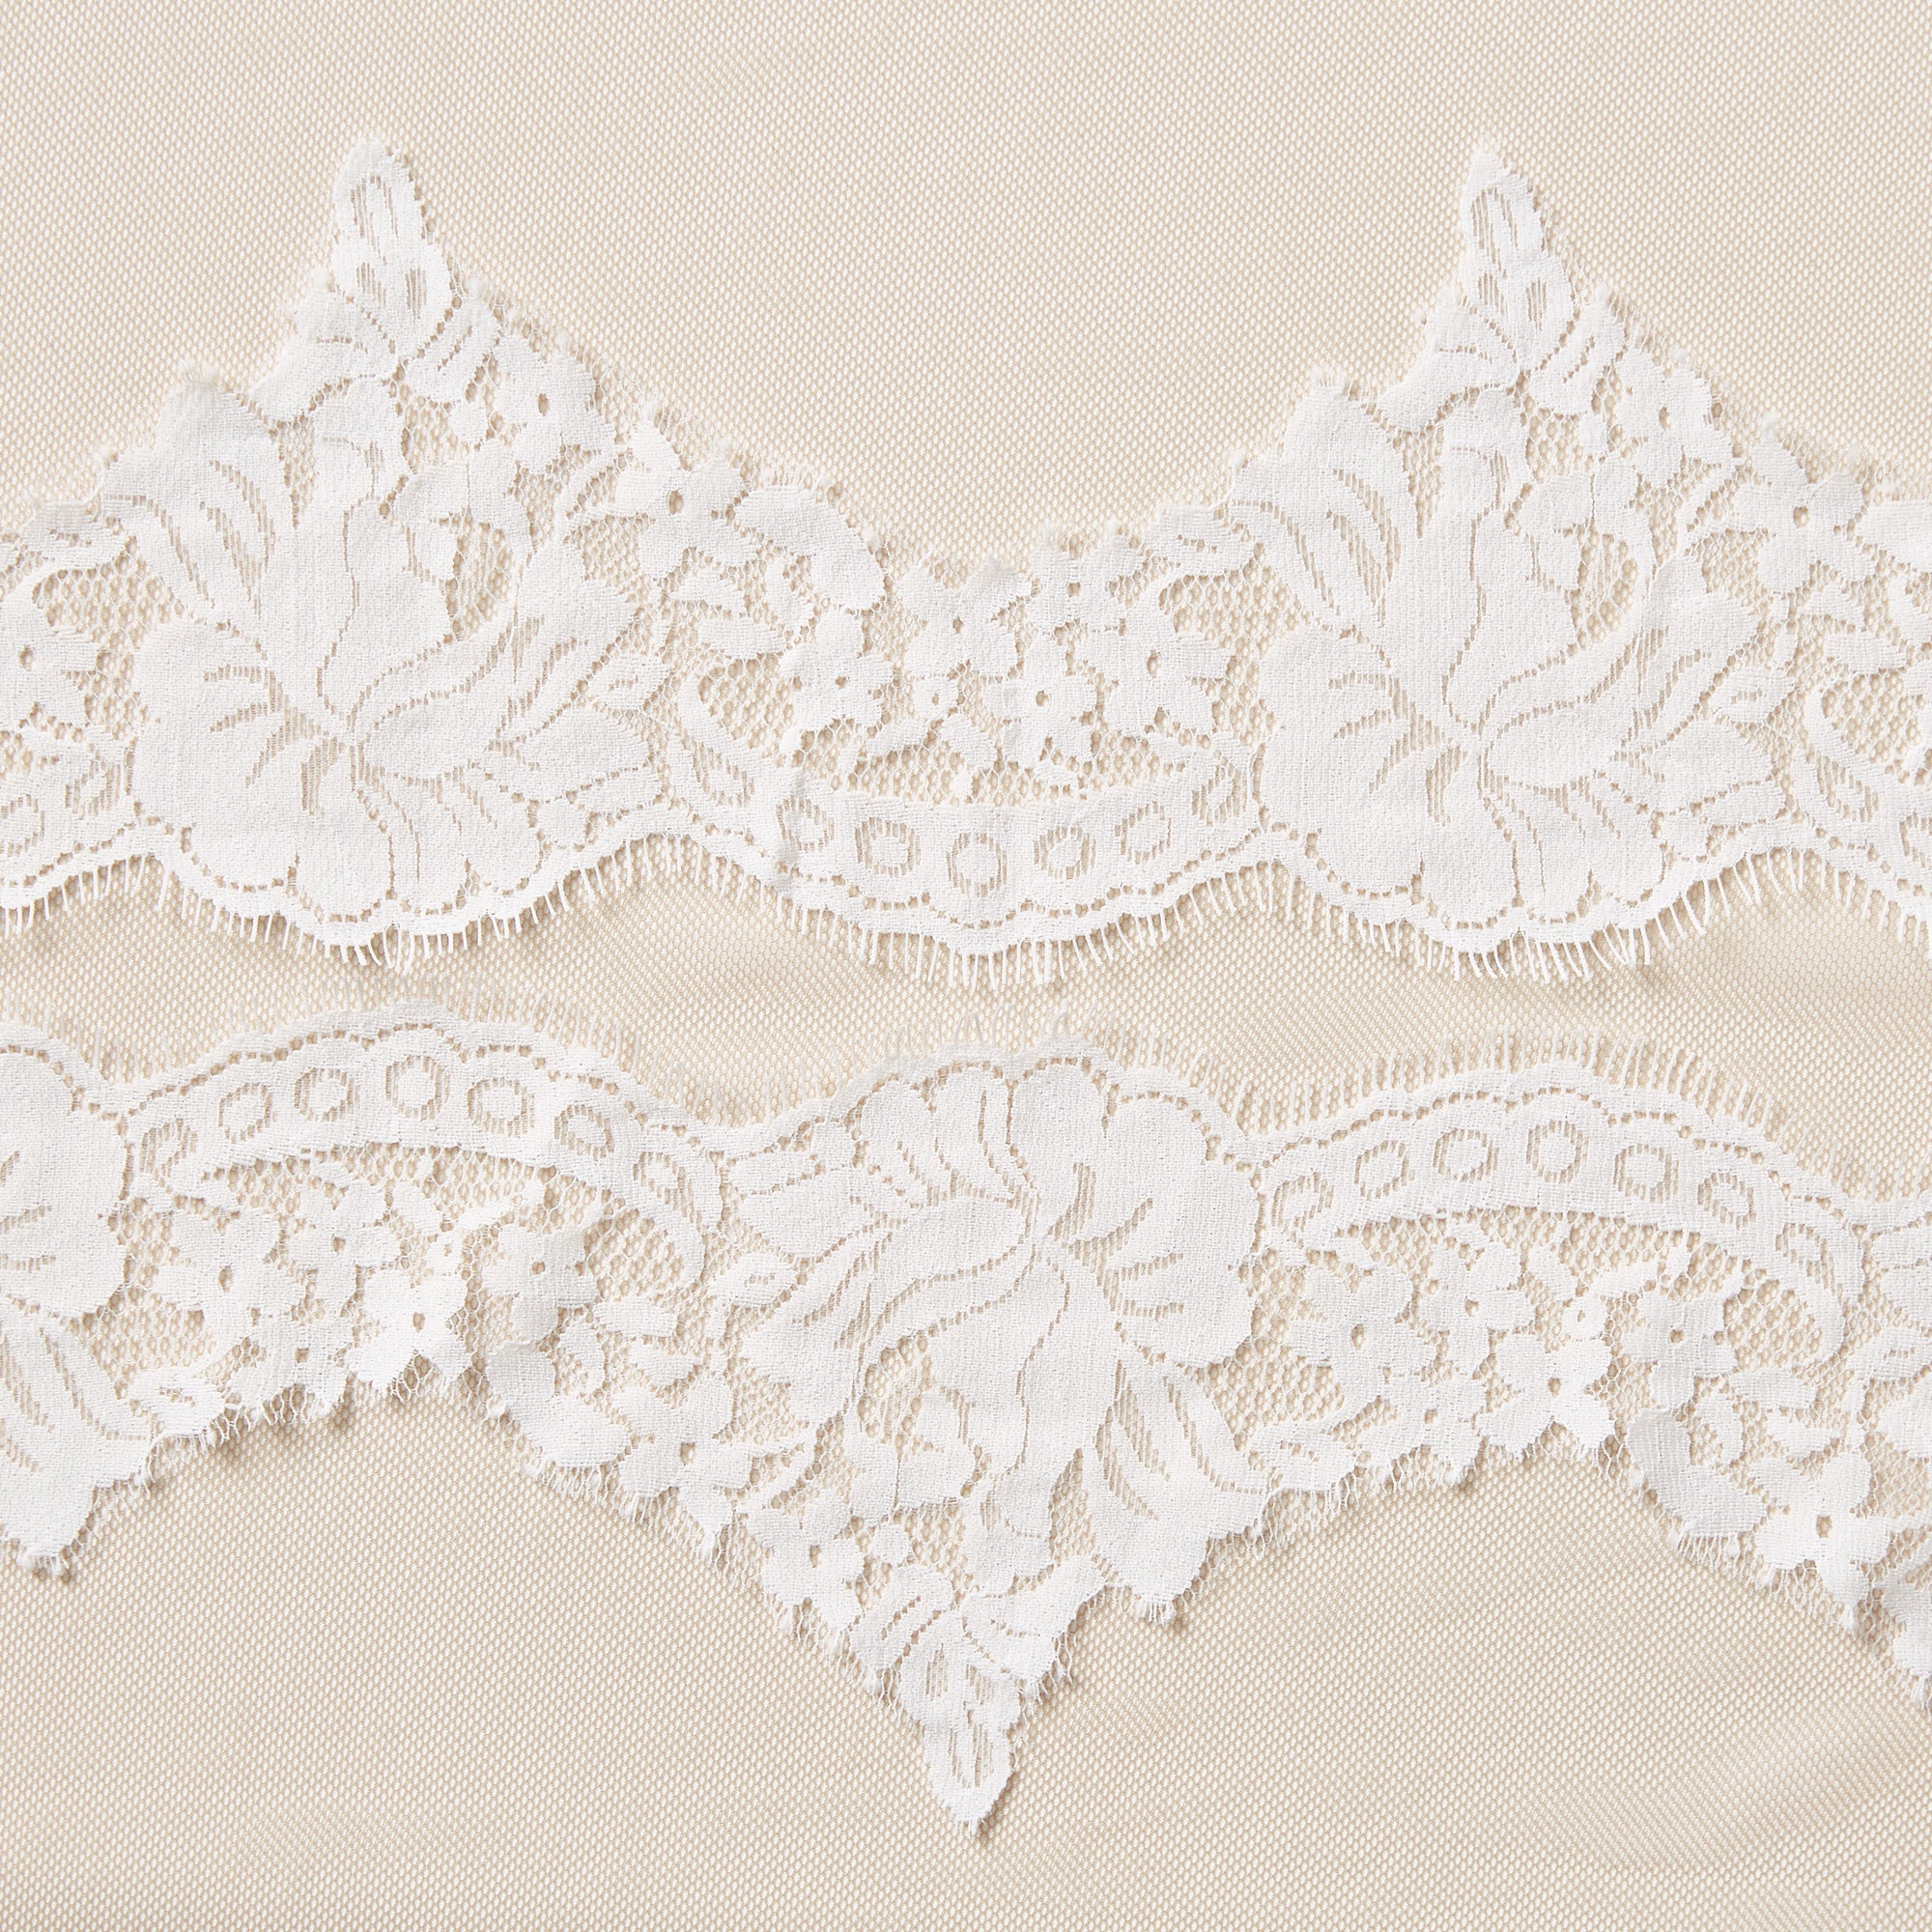 Displaying rose lace with the the trim Scalloped lace with eyelash trim on ivory colored pure nylon